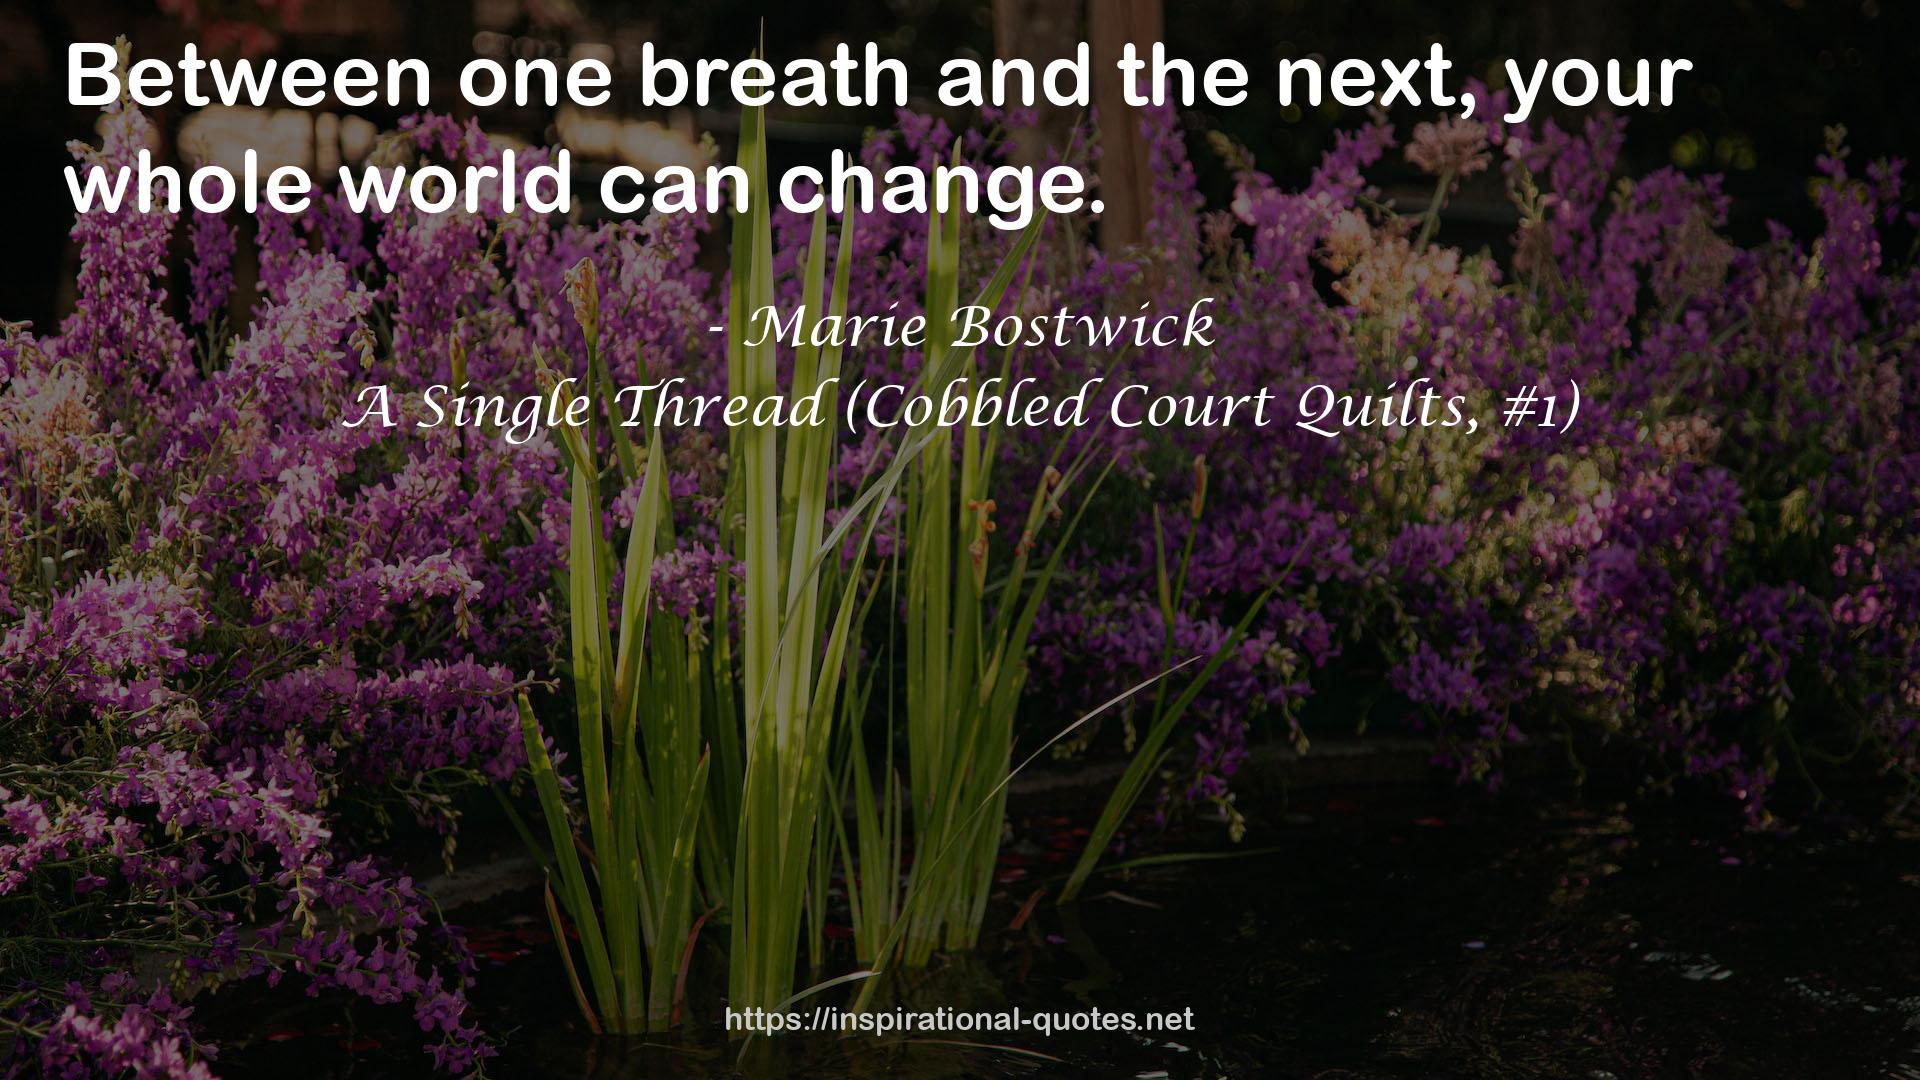 A Single Thread (Cobbled Court Quilts, #1) QUOTES